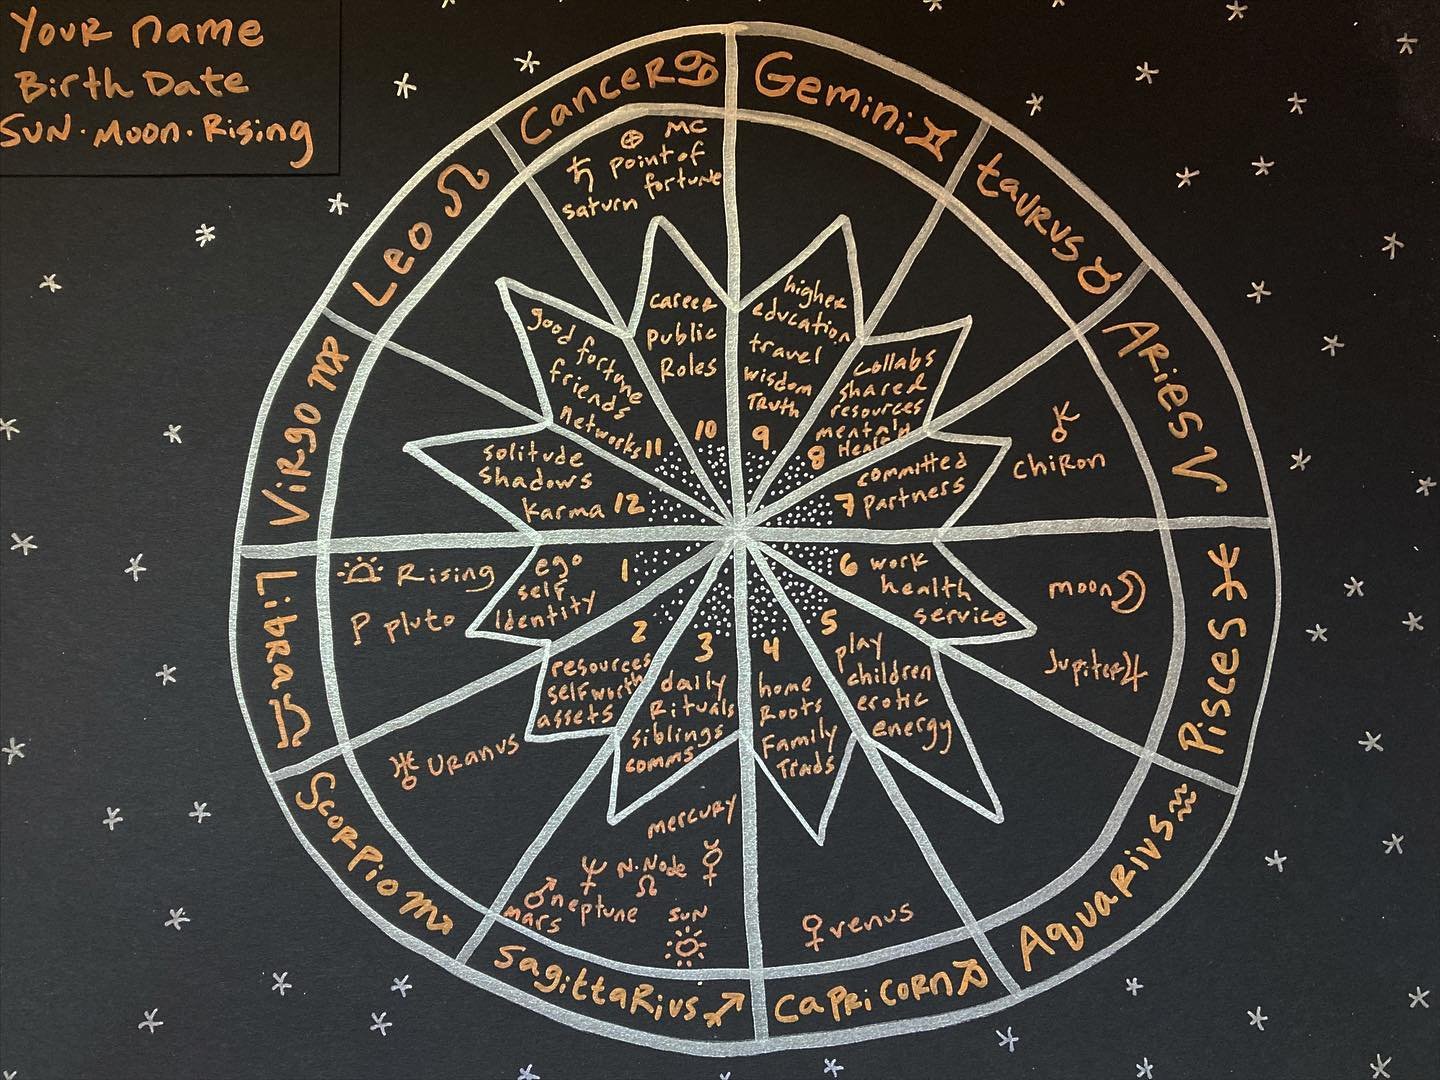 I&rsquo;ve been wanting to tell you! I do hand drawn personalized astrology charts for $25, including shipping. FM me for deets! They make great gifts, too 😍🌑✨
.
.
.
.
.
#astrologersofinstagram #handdrawnnatalcharts #yournatalchart #loveandbeauty